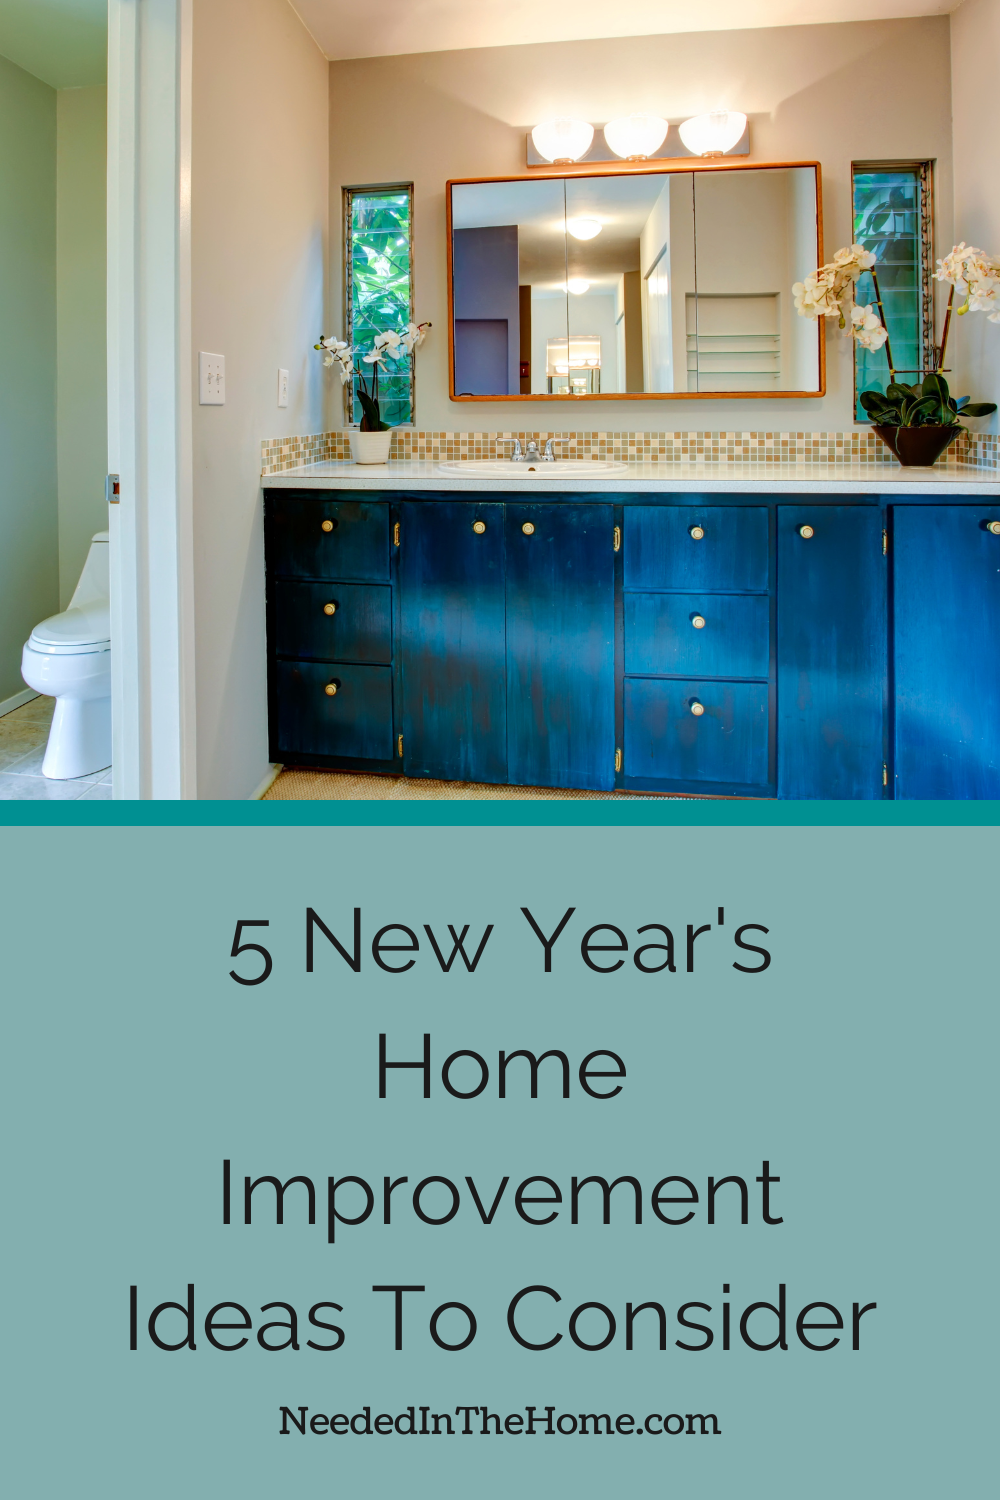 pinterest pin description 5 new years home improvement ideas to consider bathroom vanity with plants neededinthehome